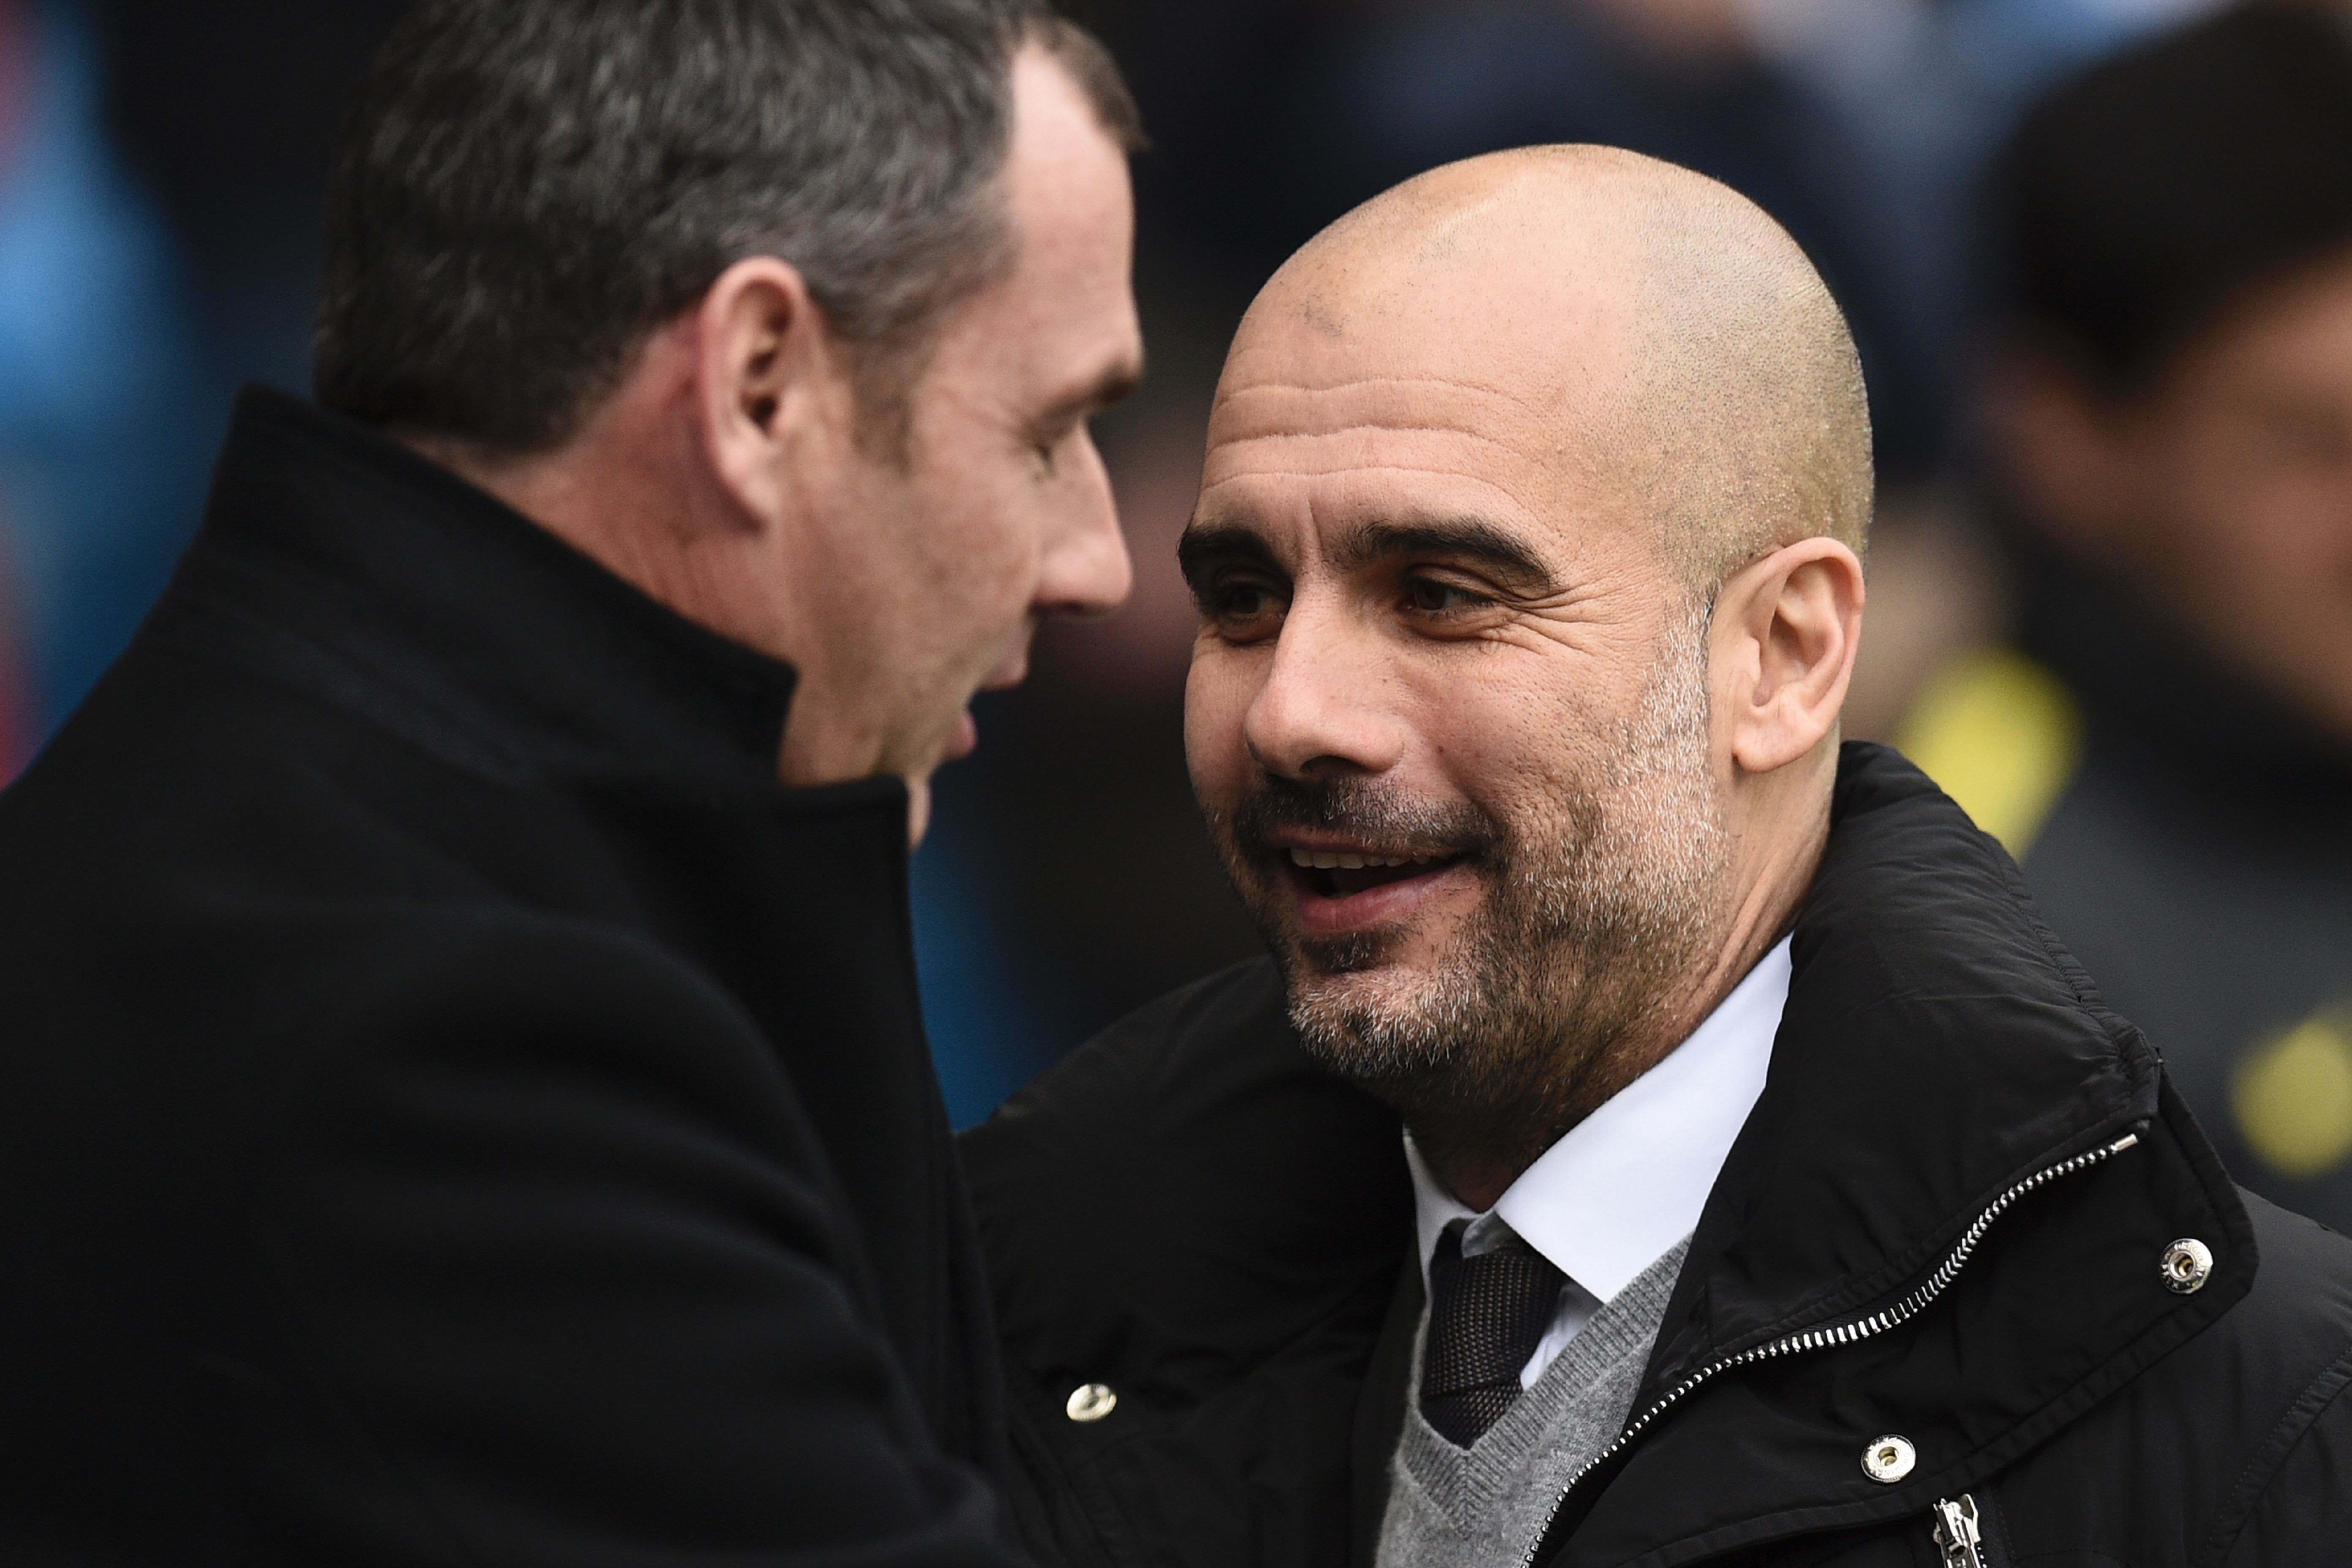 Manchester City's Spanish manager Pep Guardiola greets Swansea City's English head coach Paul Clement (L) ahead of the English Premier League football match between Manchester City and Swansea City at the Etihad Stadium in Manchester, north west England, on February 5, 2017. / AFP / Oli SCARFF / RESTRICTED TO EDITORIAL USE. No use with unauthorized audio, video, data, fixture lists, club/league logos or 'live' services. Online in-match use limited to 75 images, no video emulation. No use in betting, games or single club/league/player publications.  /         (Photo credit should read OLI SCARFF/AFP/Getty Images)